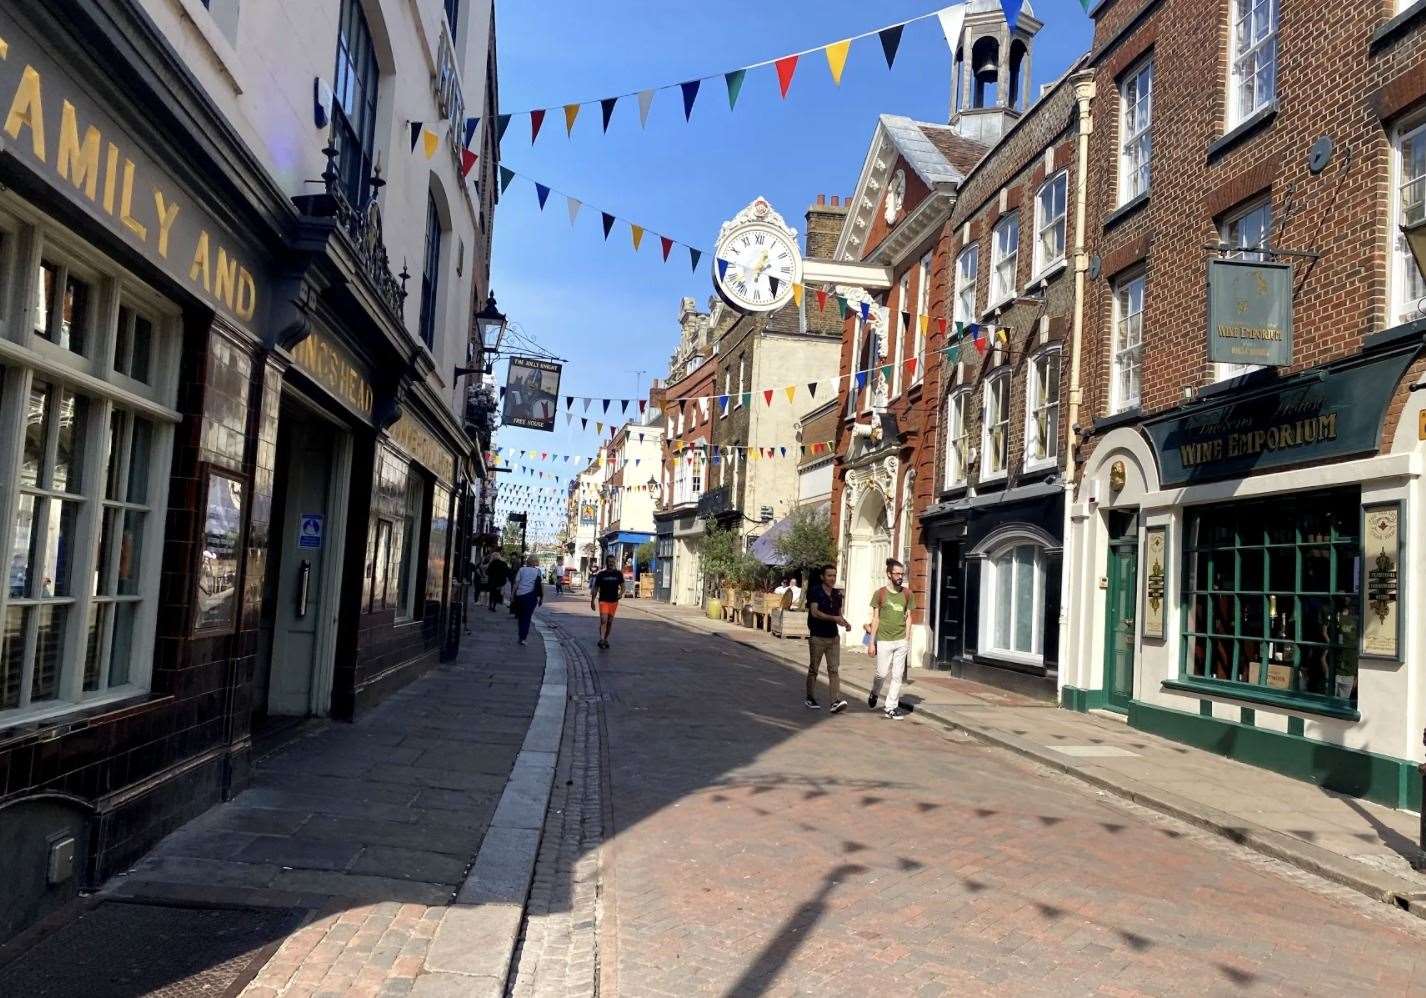 Rochester is lined with independent shops and restaurants